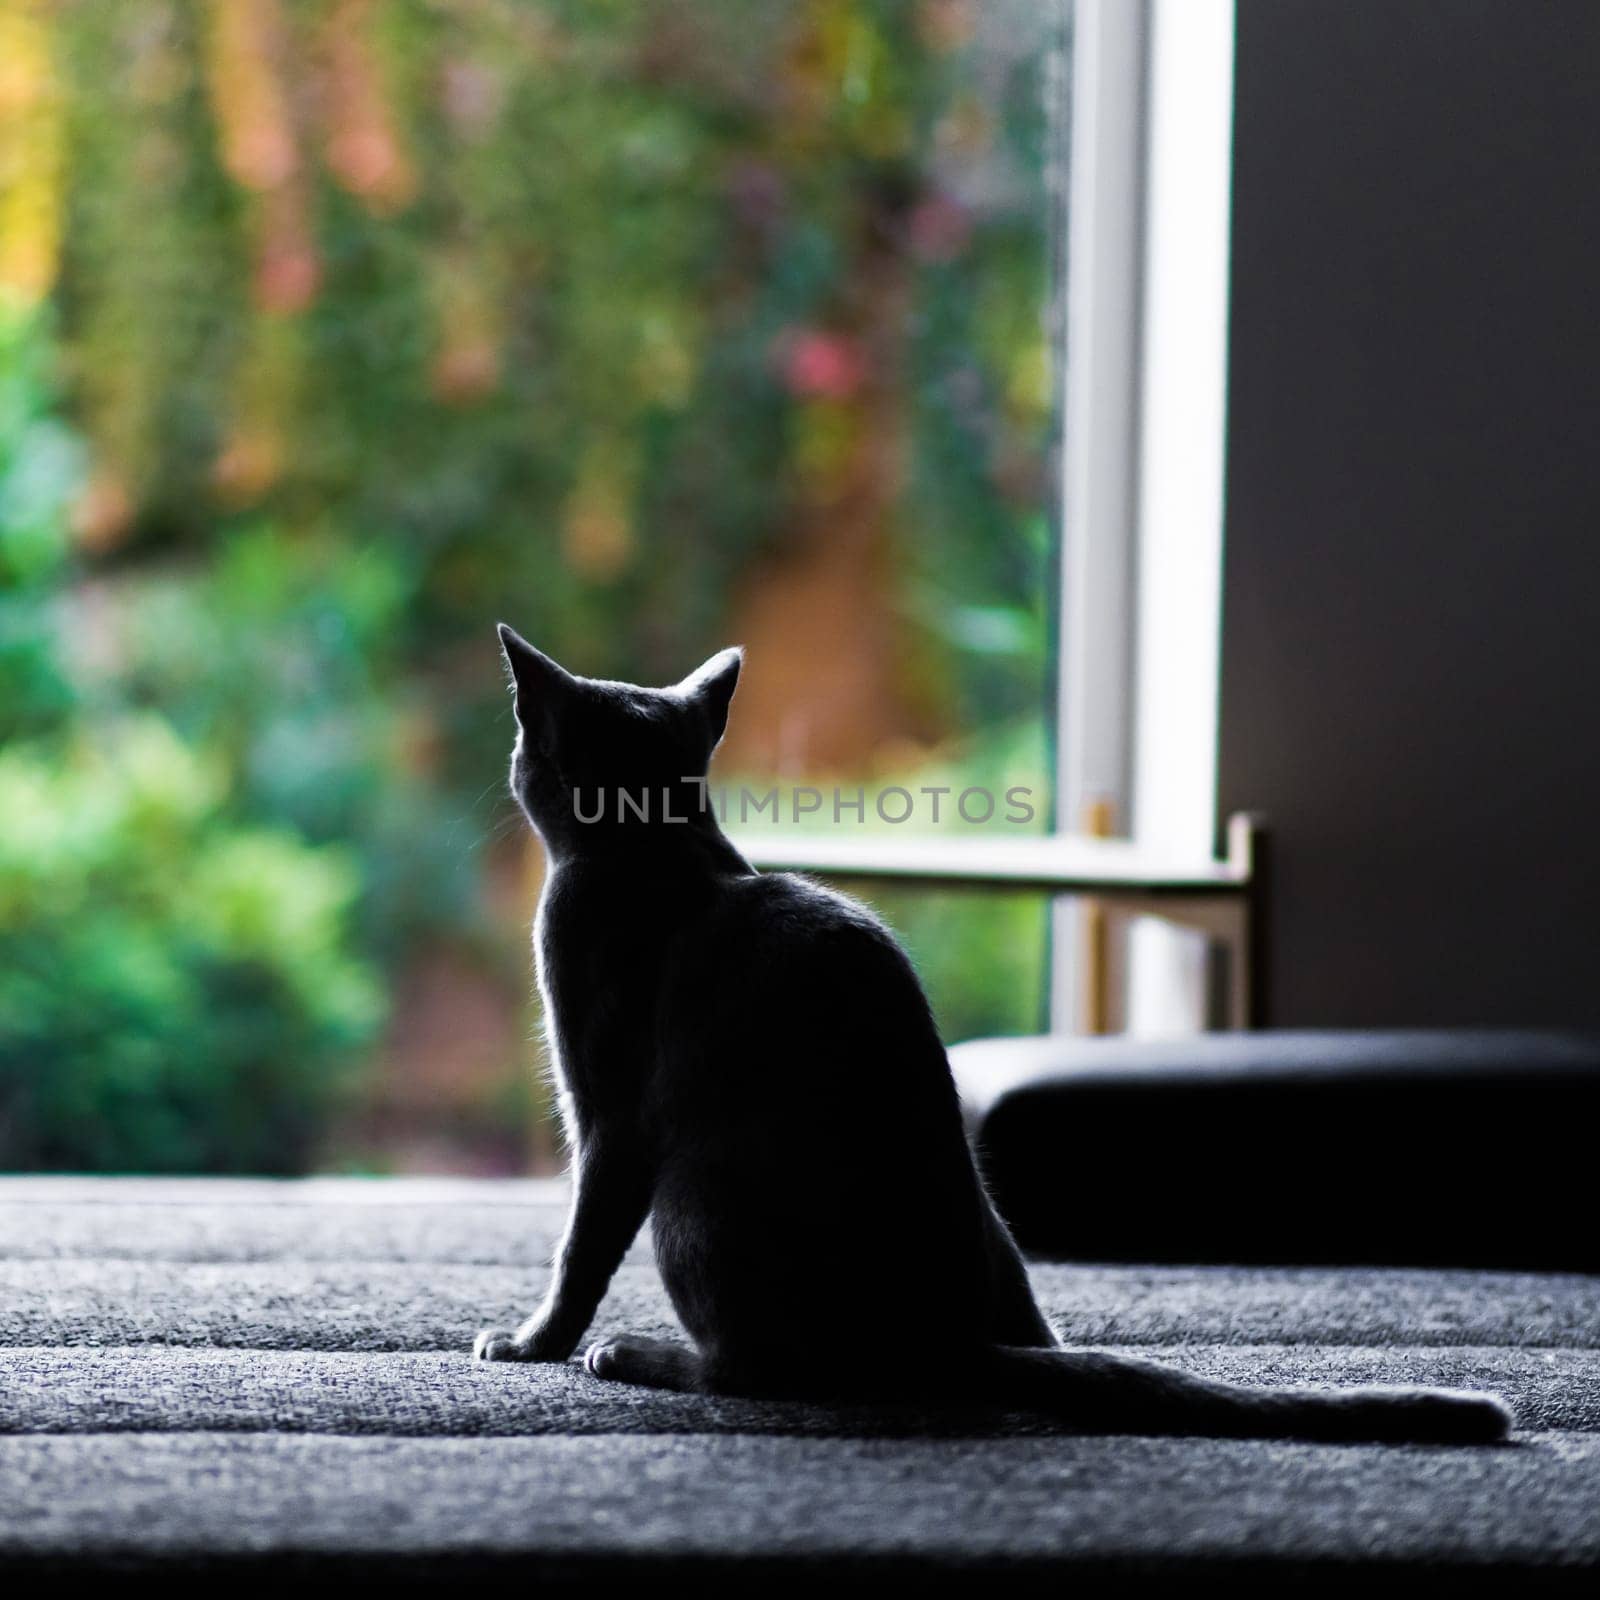 Young cat sitting on big bed in room, silhouette photo. Garden view